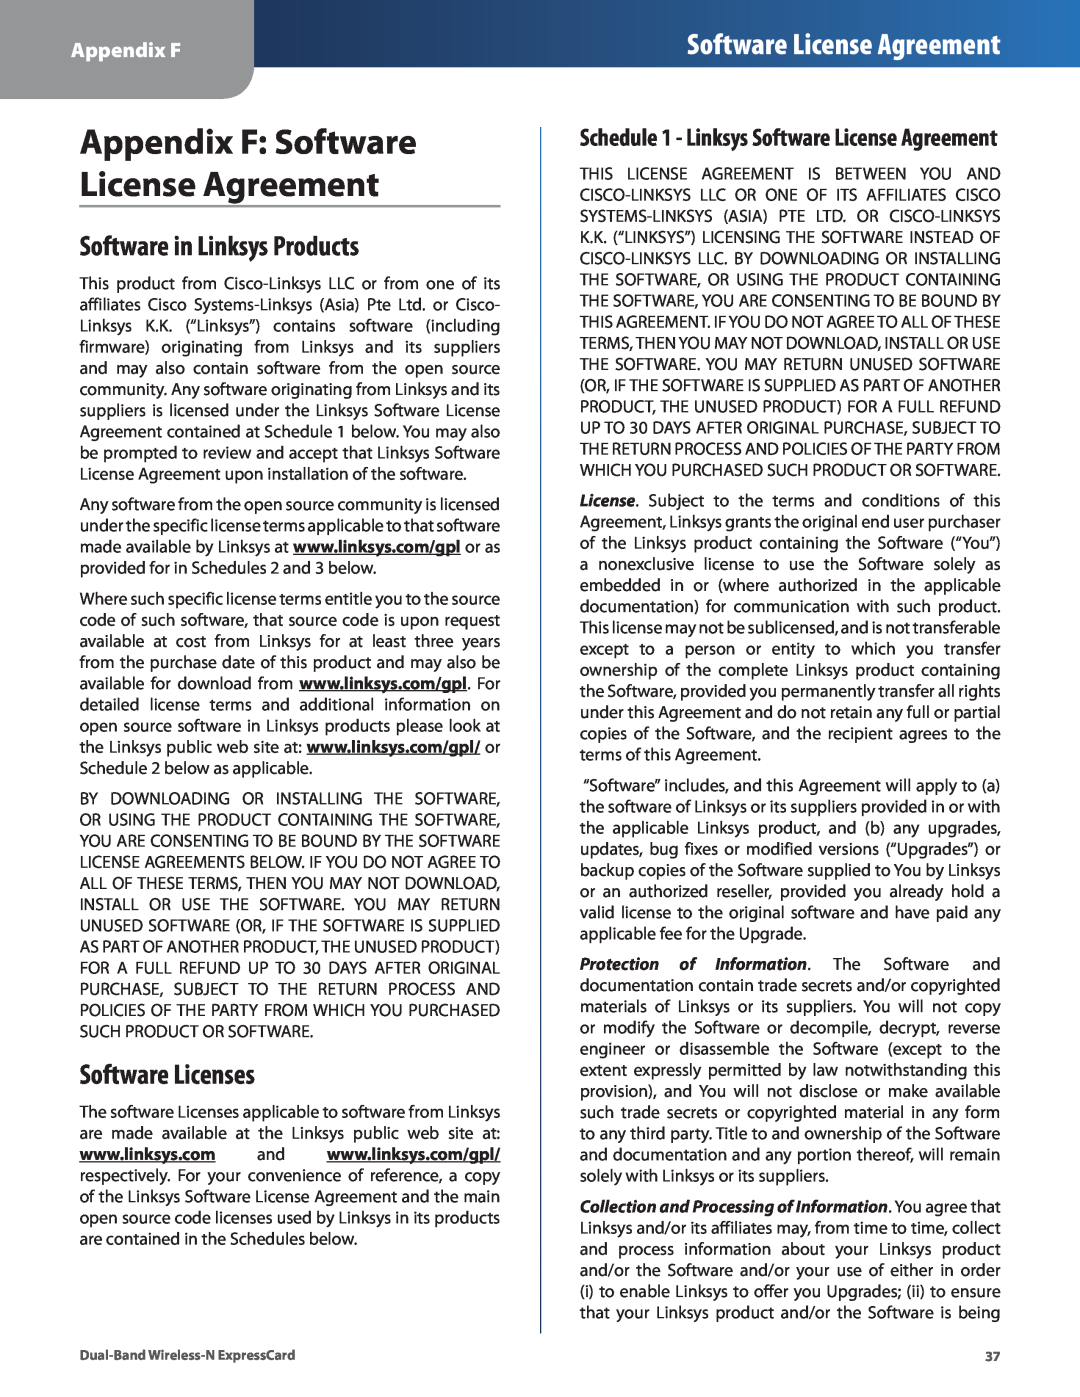 Cisco Systems WEC600N manual Appendix F Software License Agreement, Software in Linksys Products, Software Licenses 